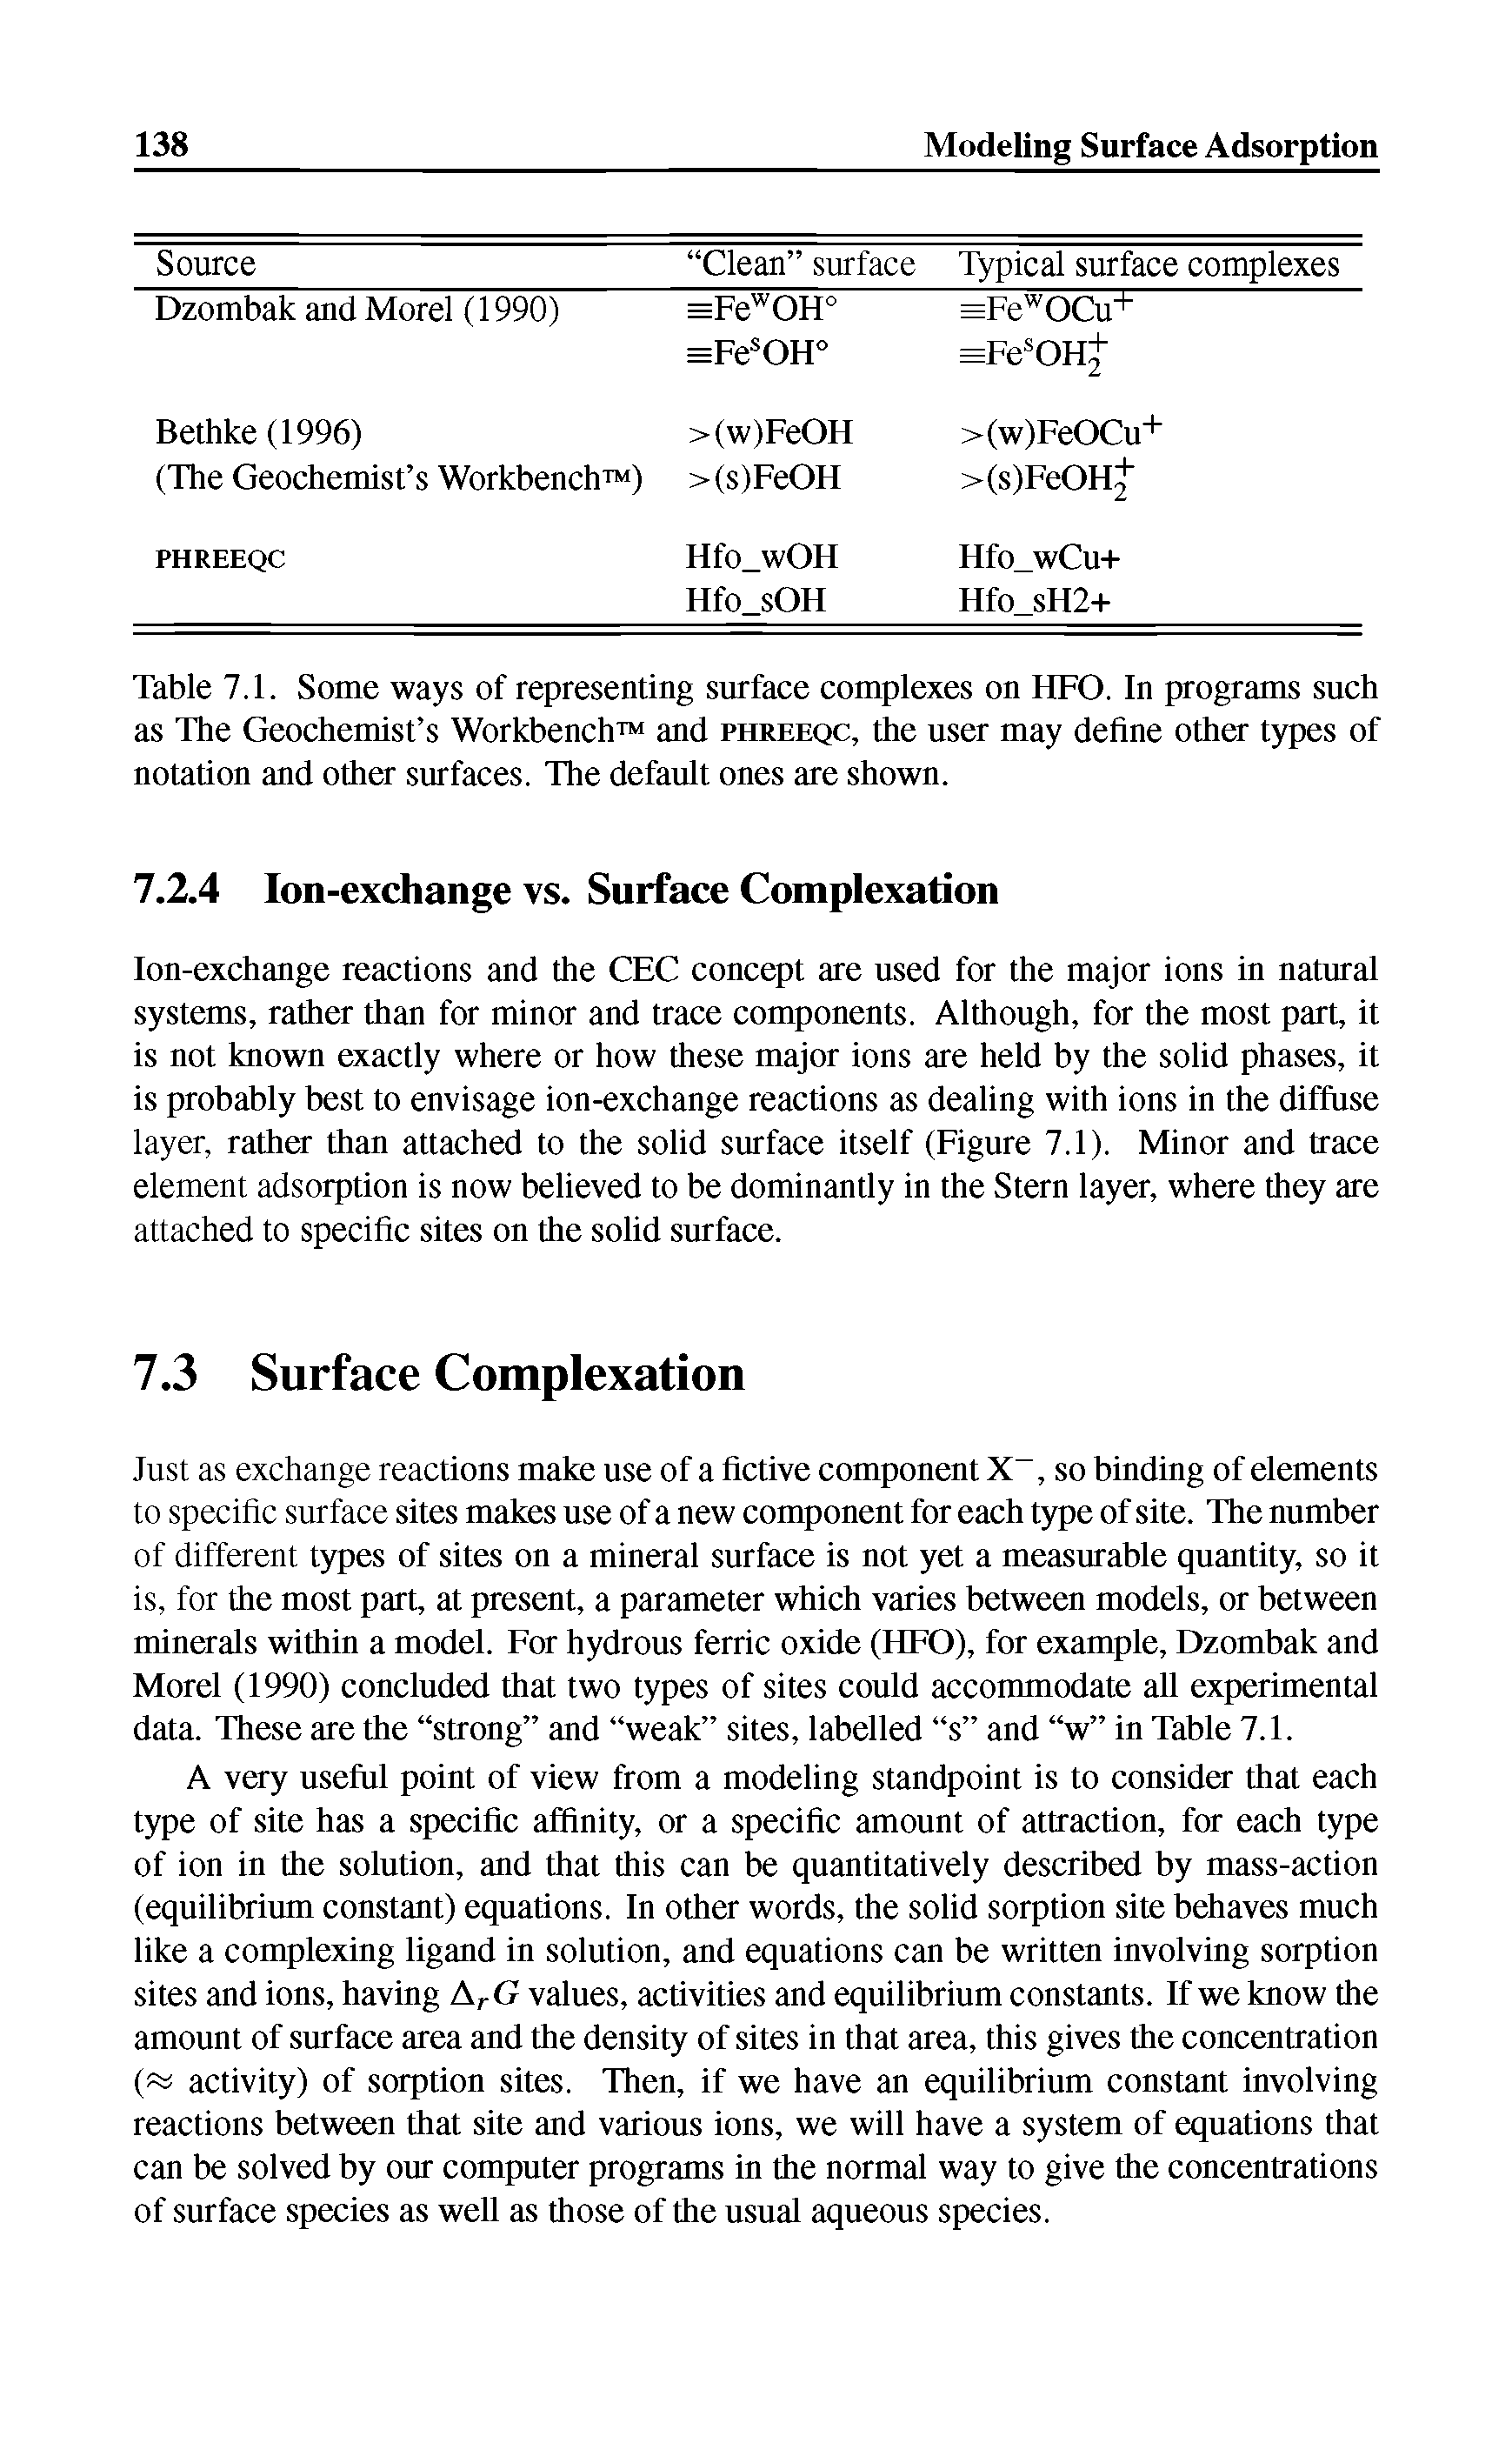 Table 7.1. Some ways of representing surface complexes on HFO. In programs such as The Geochemist s Workbench and phreeqc, the user may define other types of notation and other surfaces. The default ones are shown.